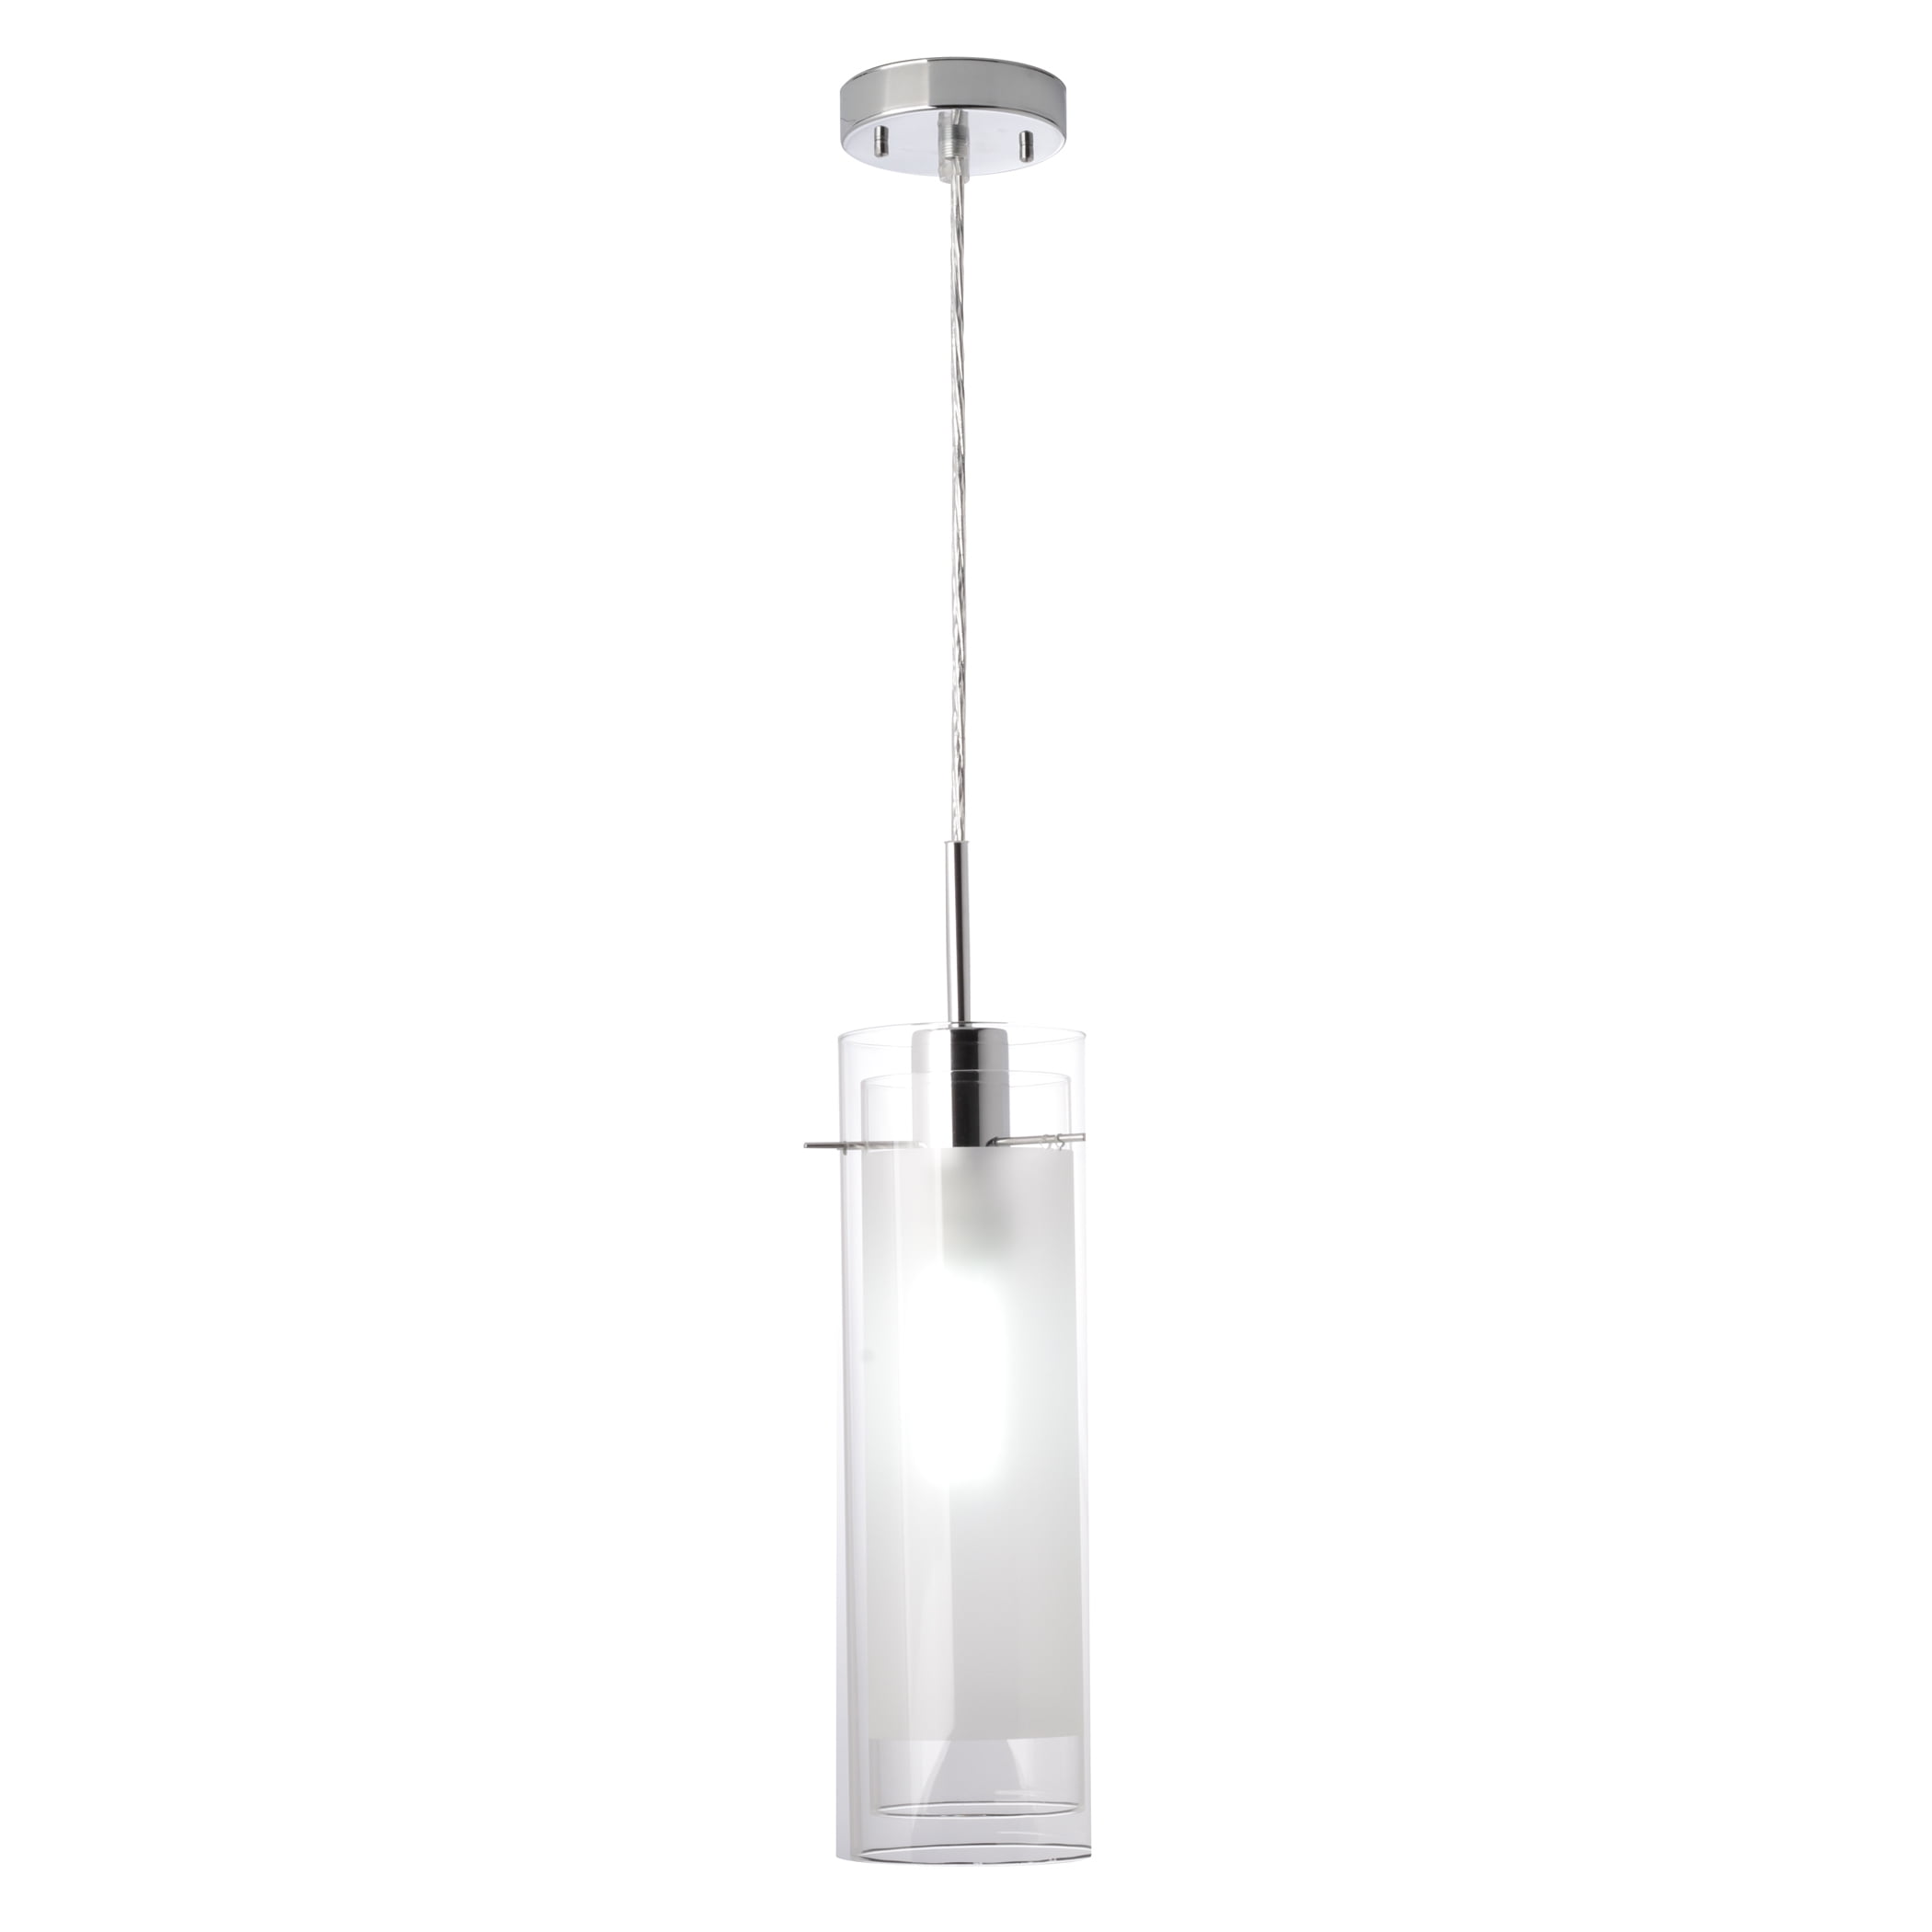 Celiling Light 3D Vision Cylinder Glass Pendant In Silver And Chrome Finish 